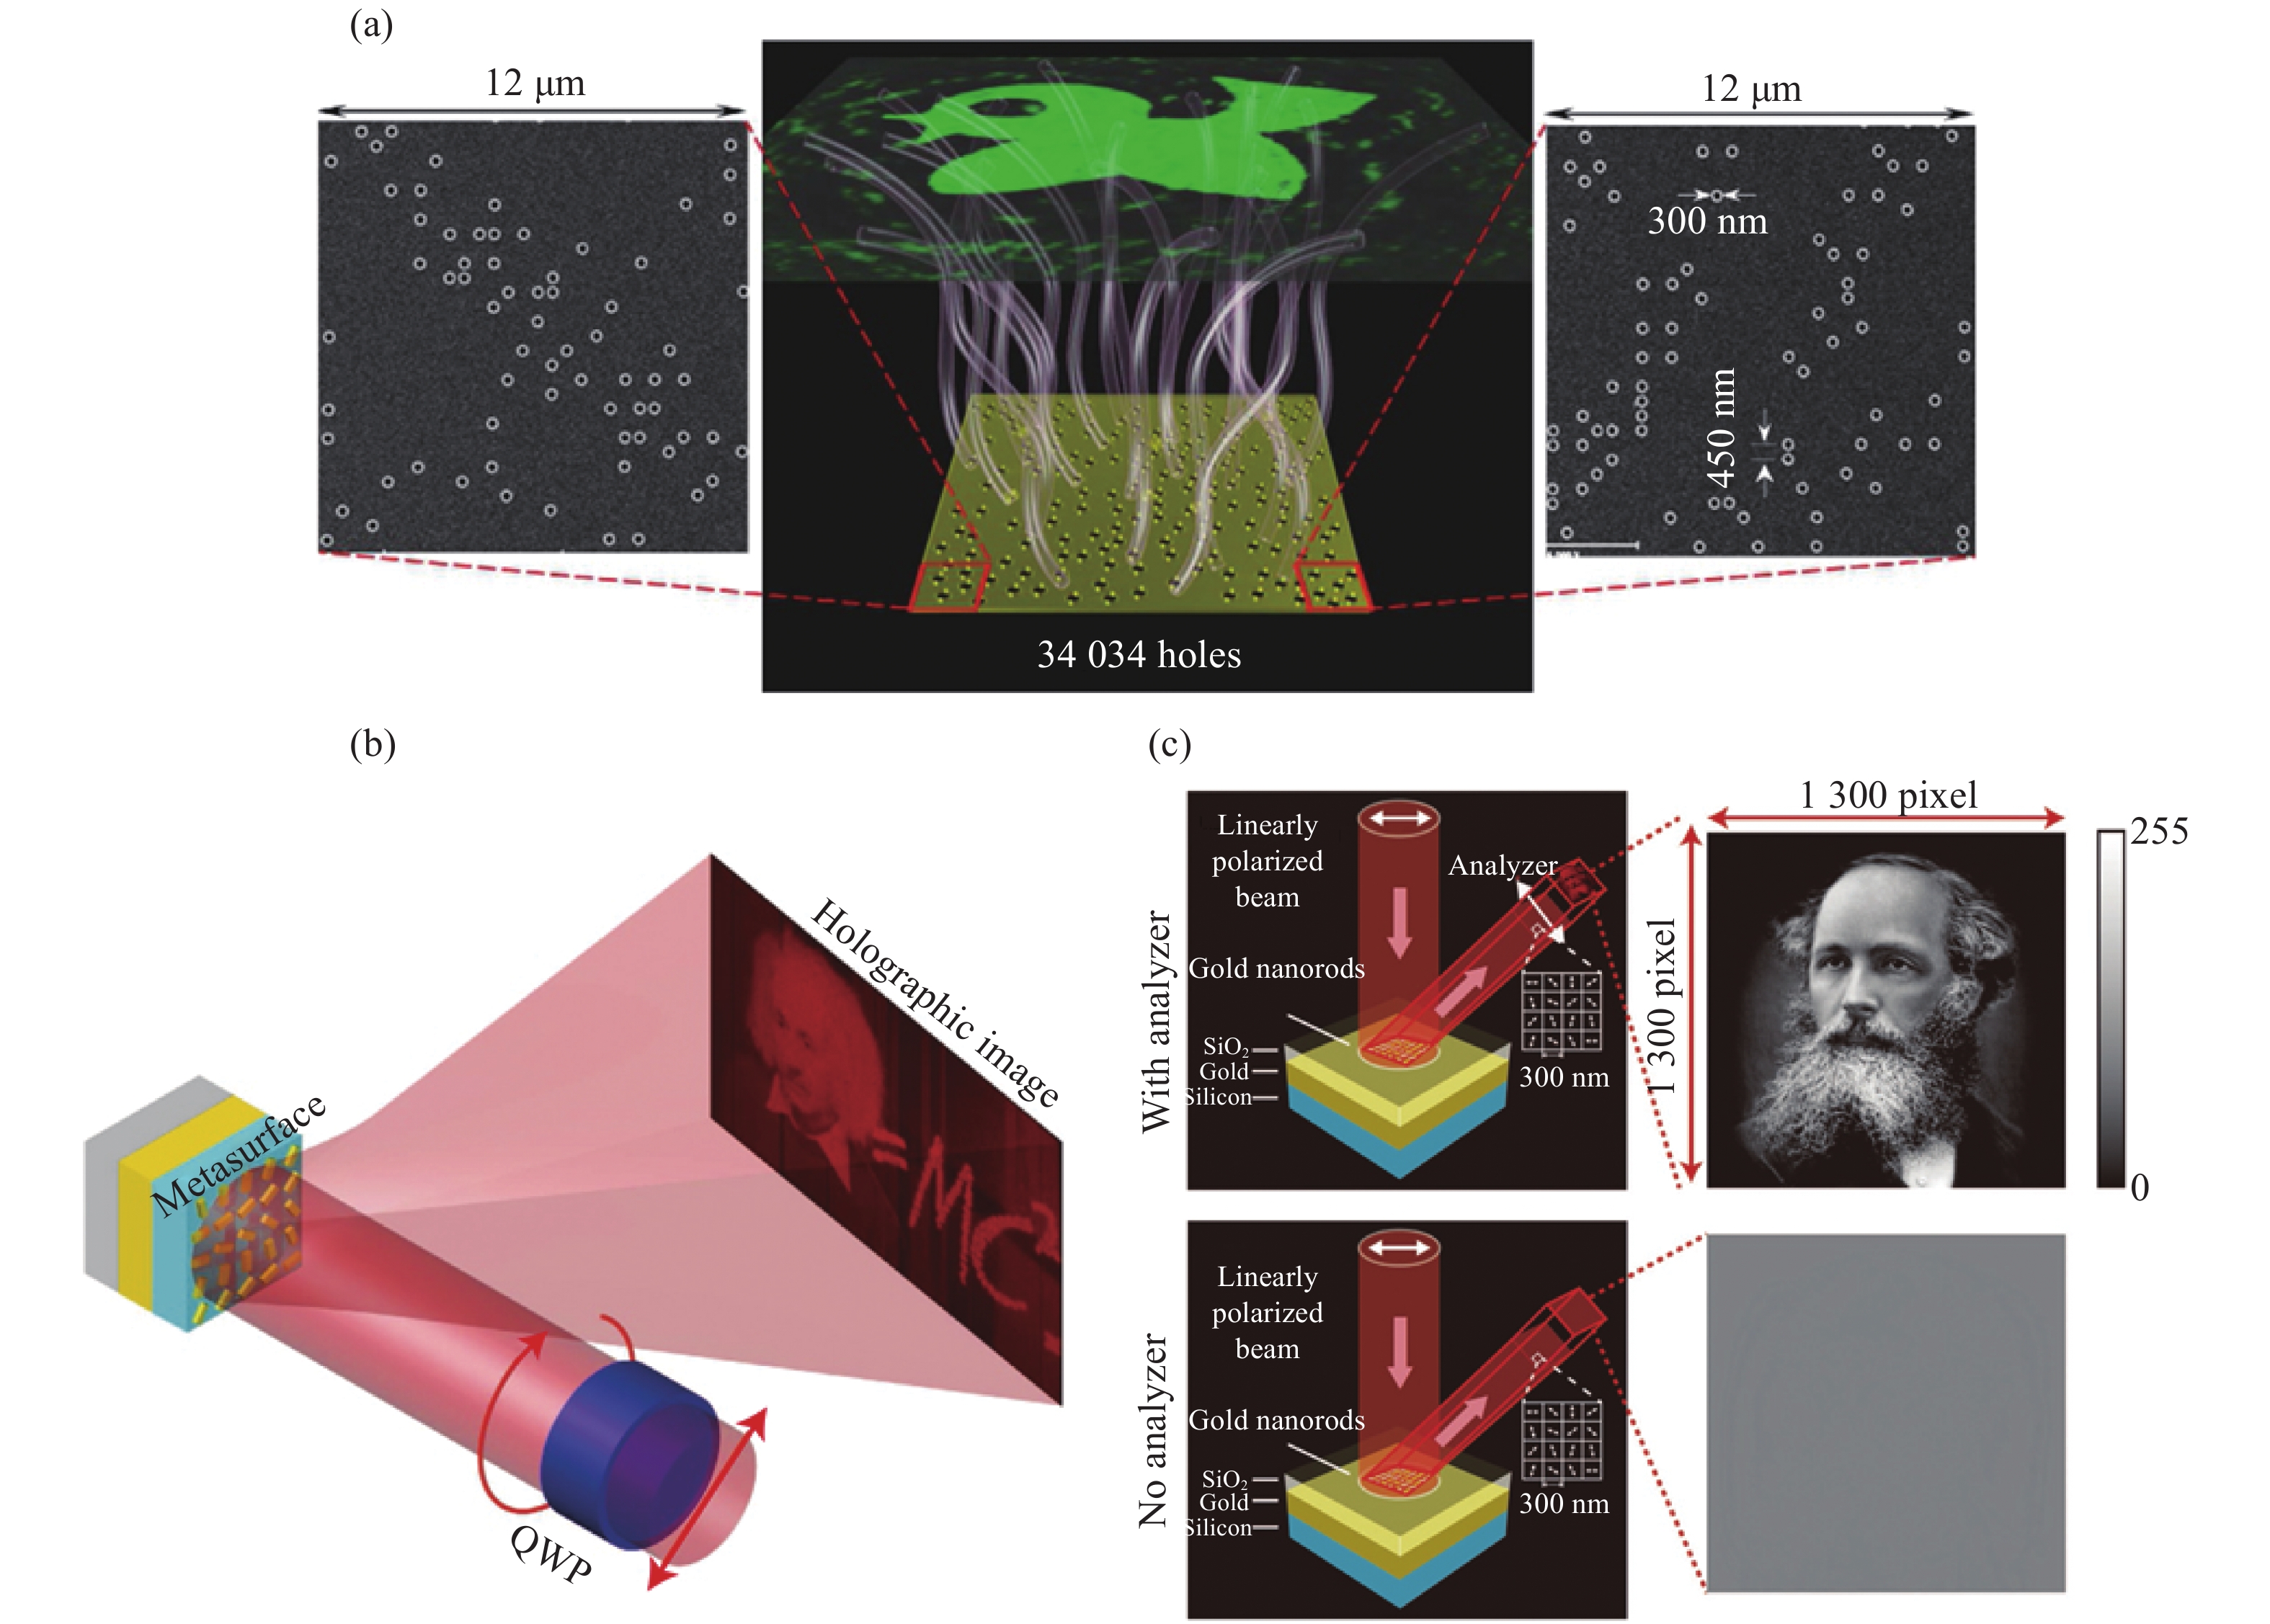 (a) Amplitude-only holography based on subwavelength nanopore diffraction[36]; (b) High efficient phase-only holography based on geometric phase[13]; (c) Hidden metasurface of the polarized image in the laser beam based on Marius's law[37]